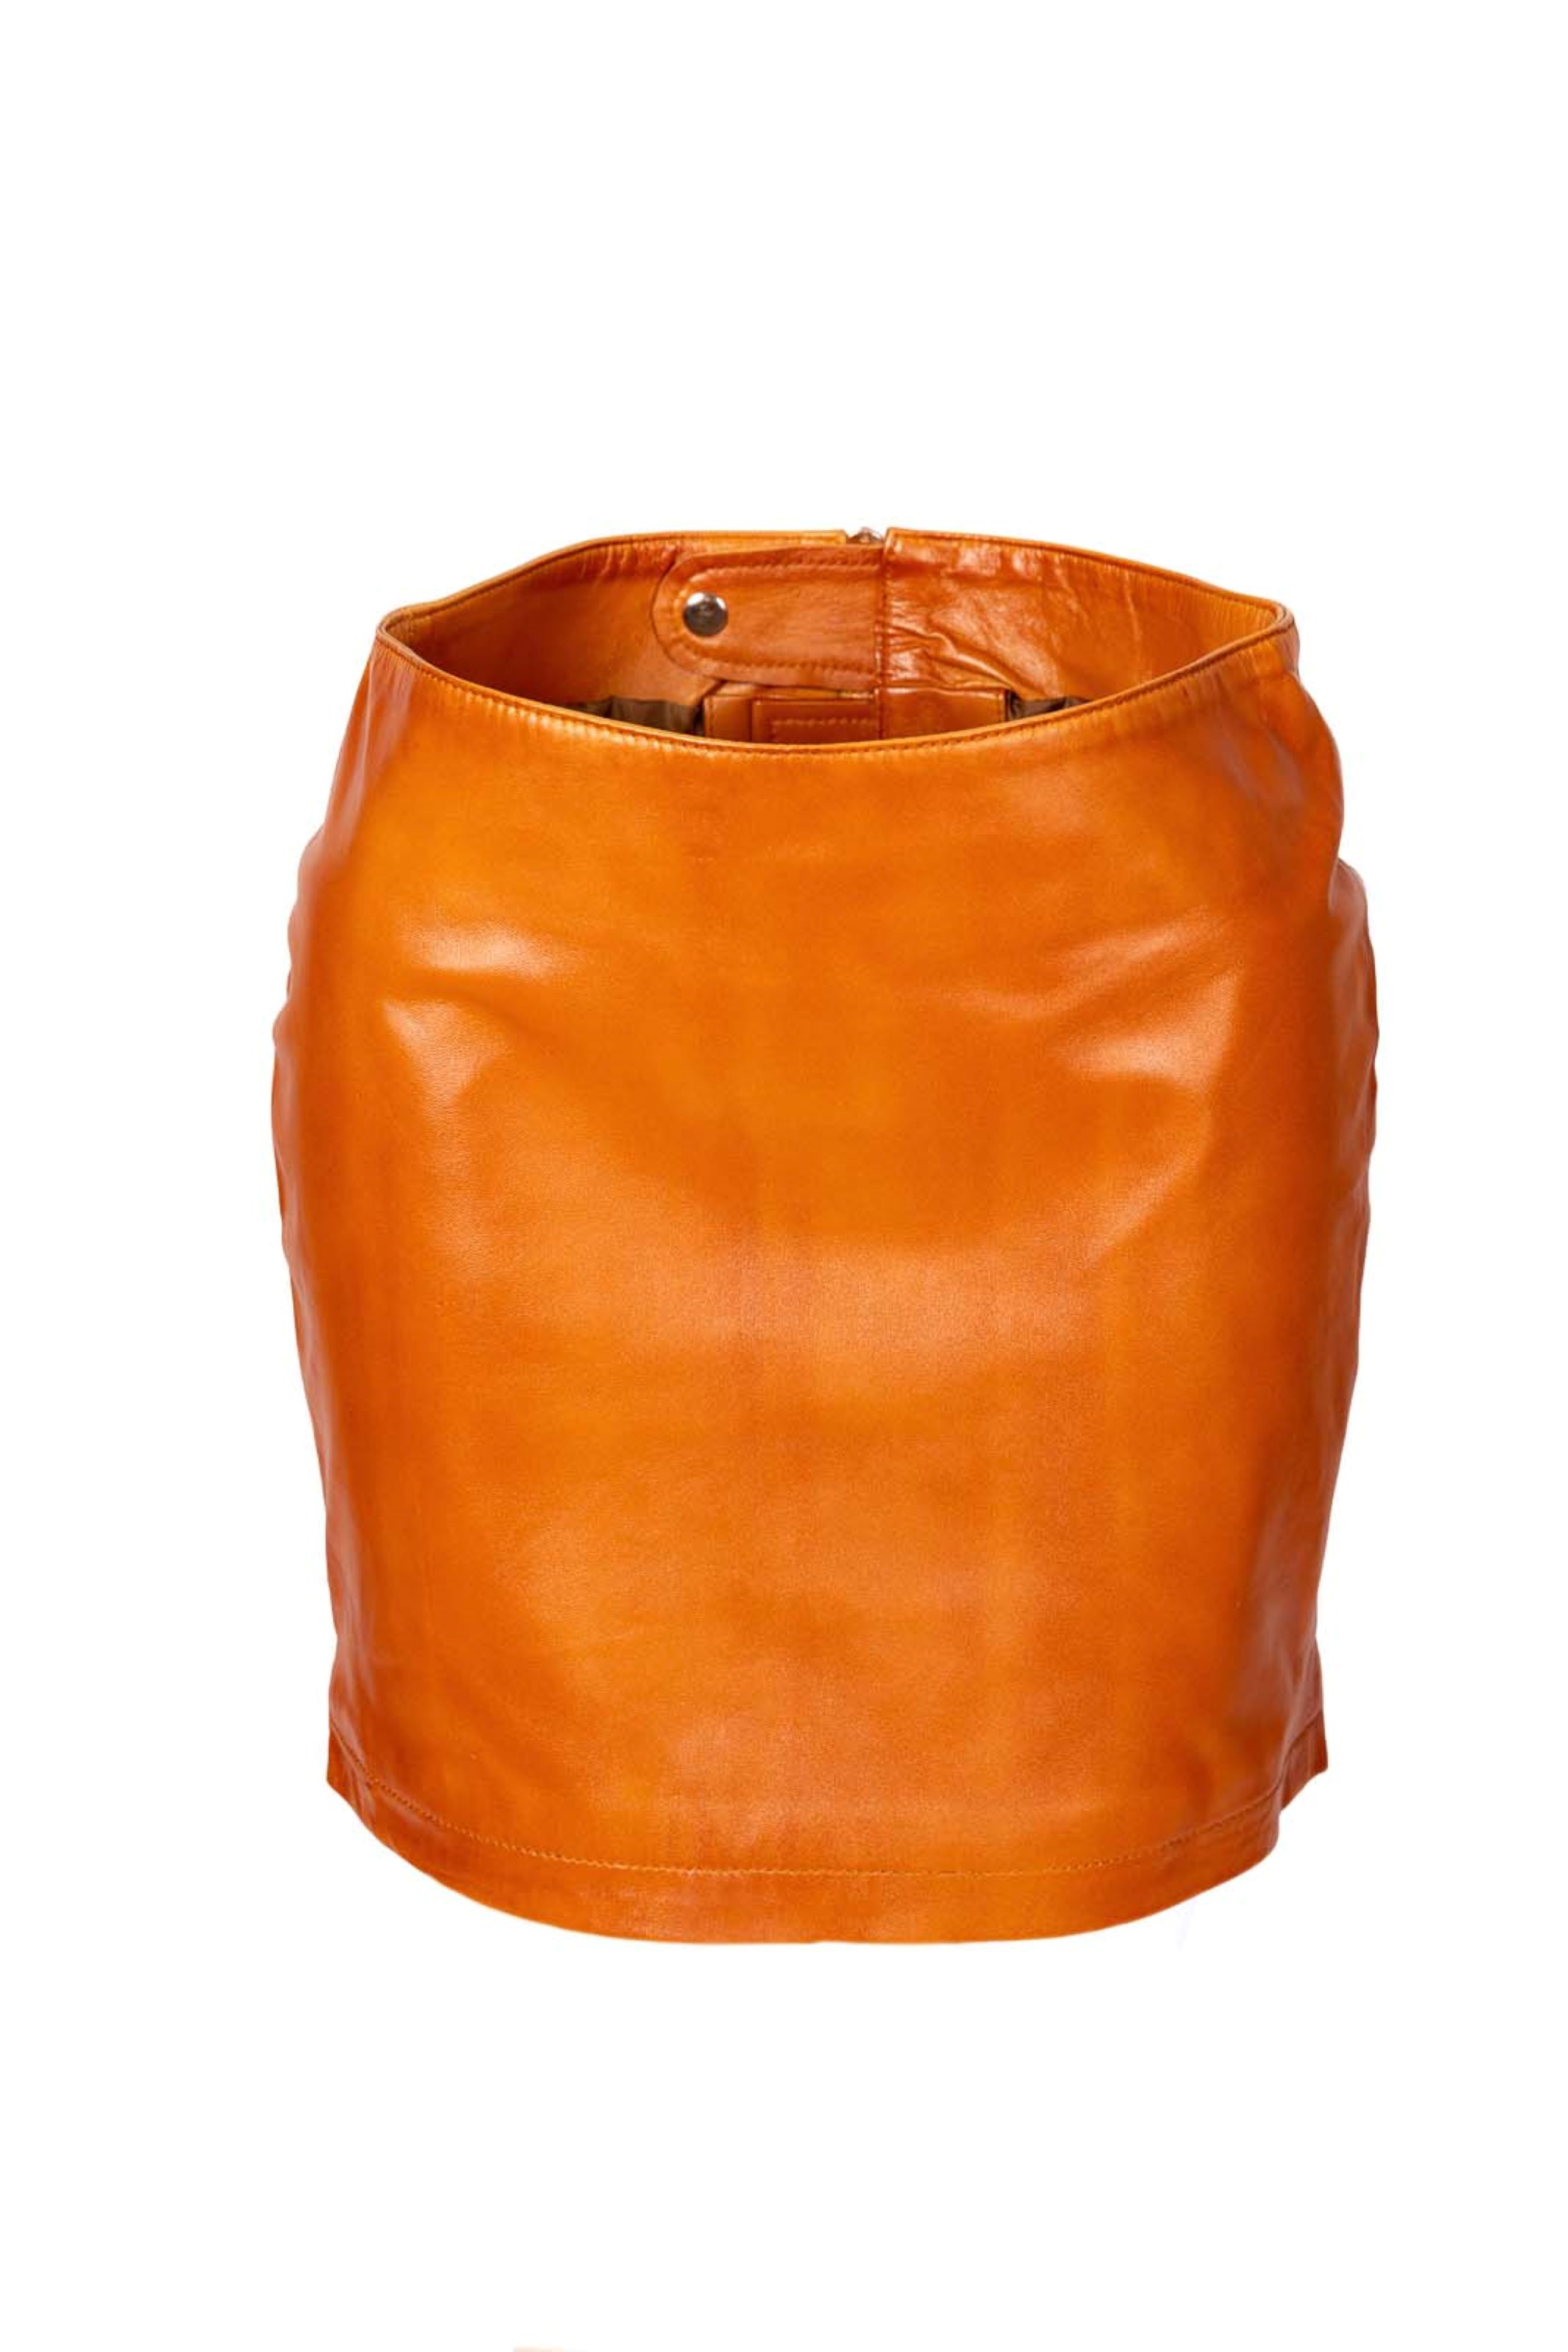 Leather Skirt in genuine  Leather in cognac - waxed